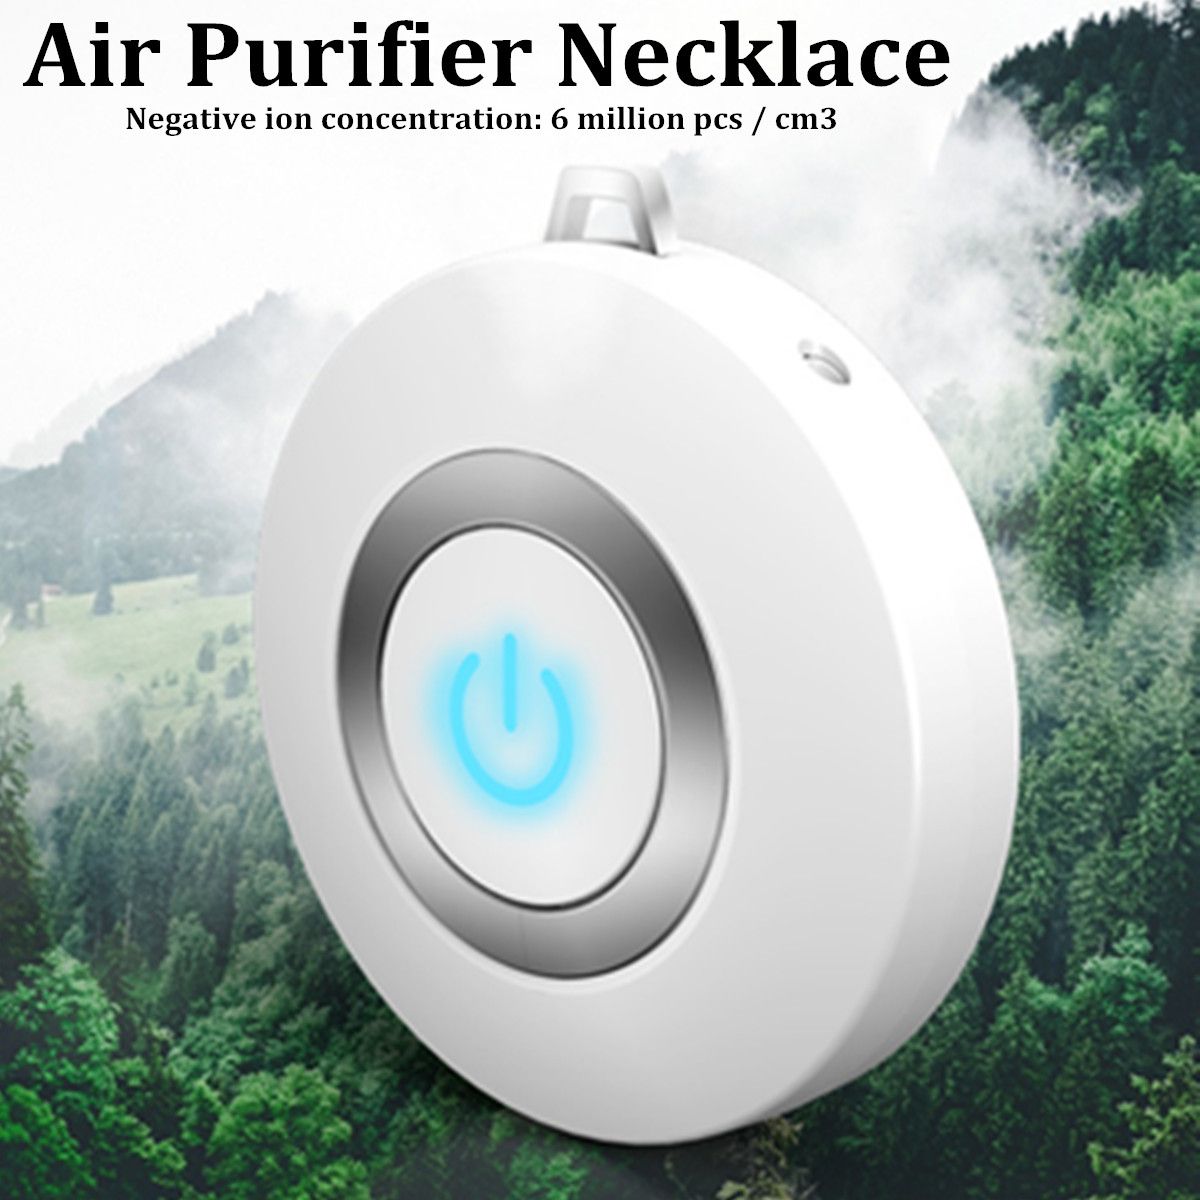 Wearable-Air-Purifier-Necklace-Ionizer-Ion-Generator-Odor-and-Smoke-Remover-1649109